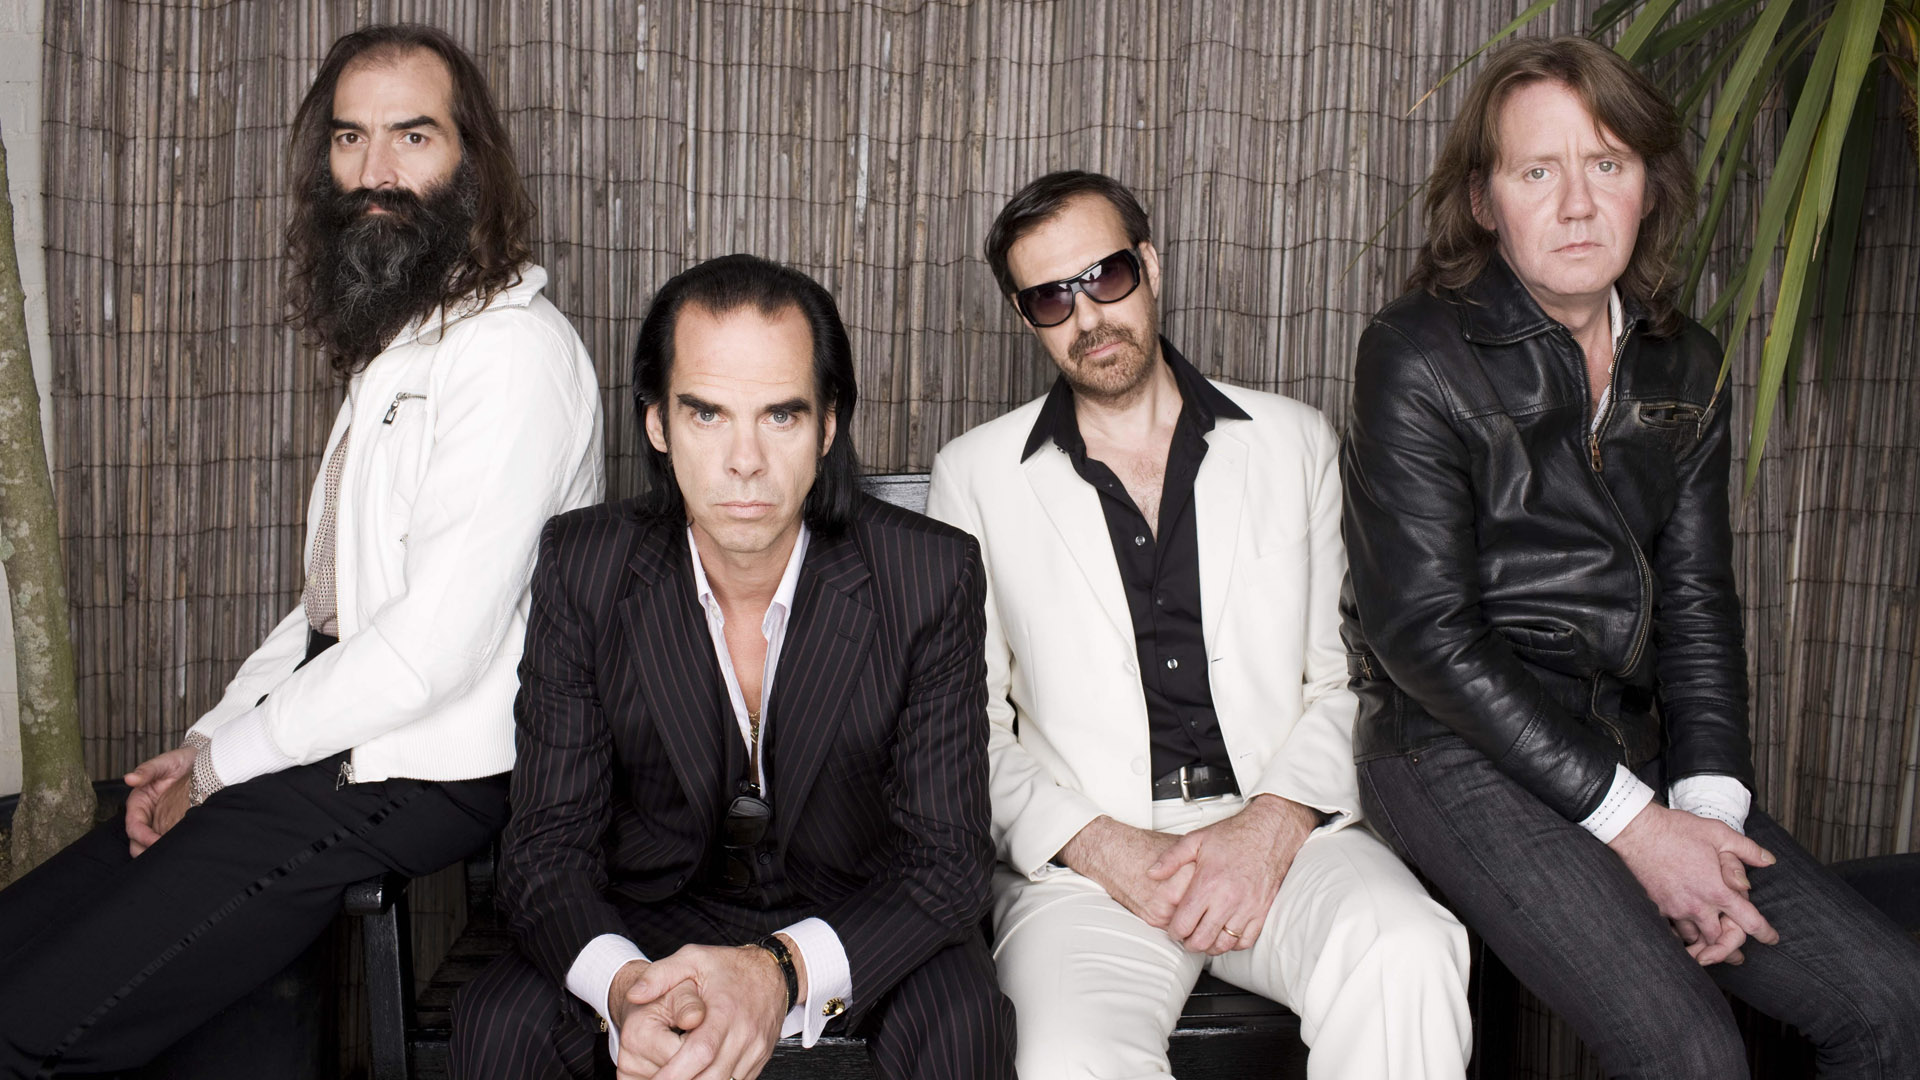 High Resolution Wallpaper | Nick Cave And The Bad Seeds 1920x1080 px